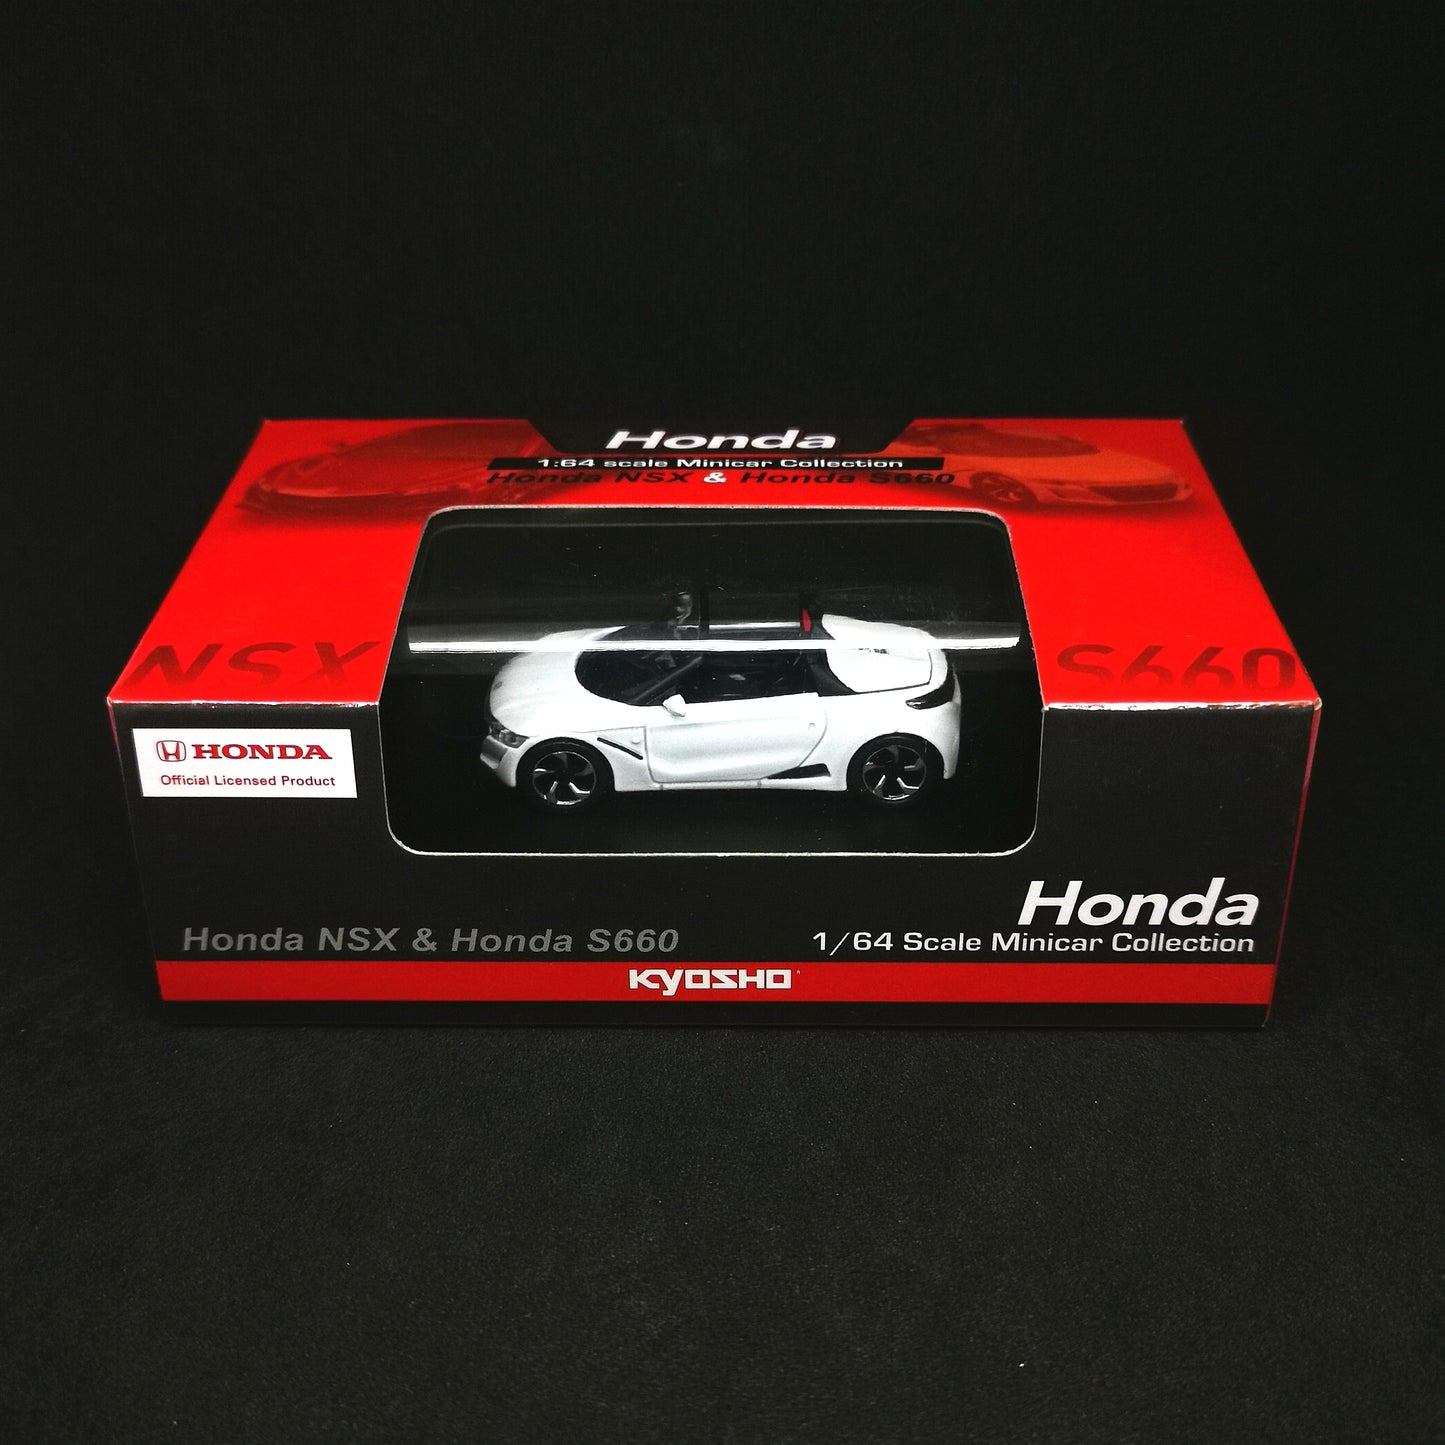 Kyosho 1:64 Scale Honda Mini Car Collection S660 Special Edition White